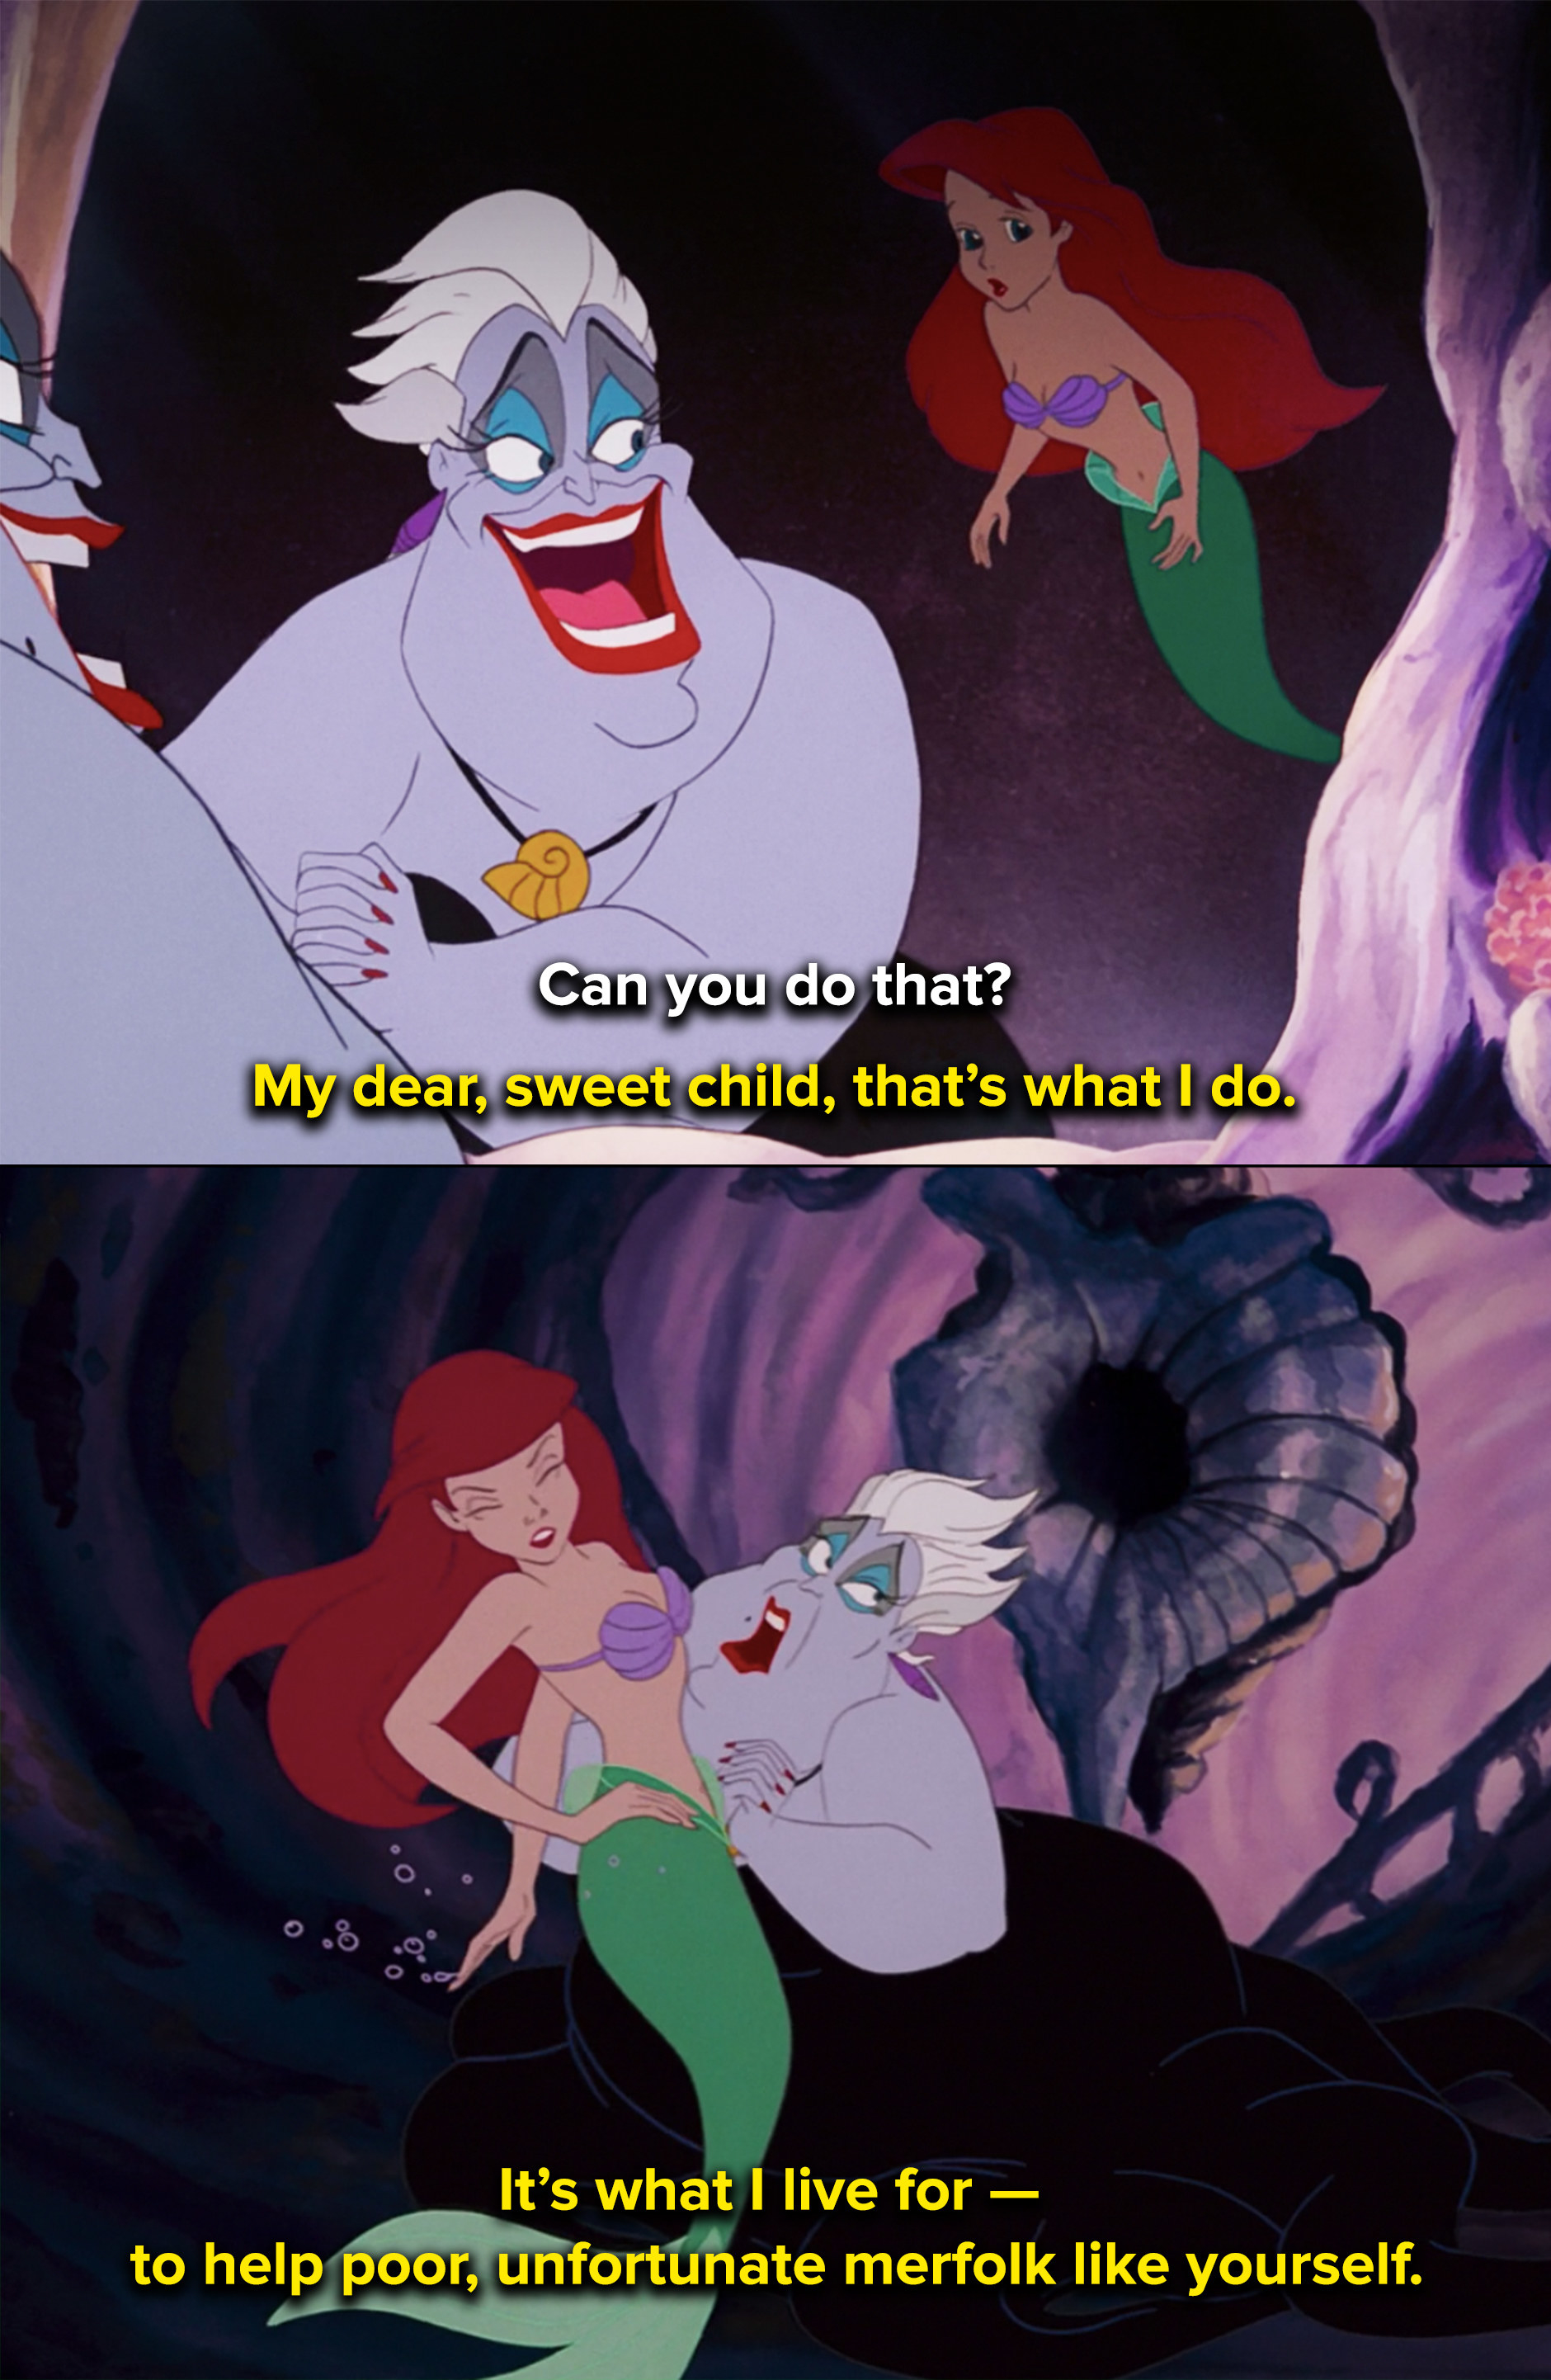 Ursula tells Ariel that helping poor, unfortunate merfolk is what she lives for